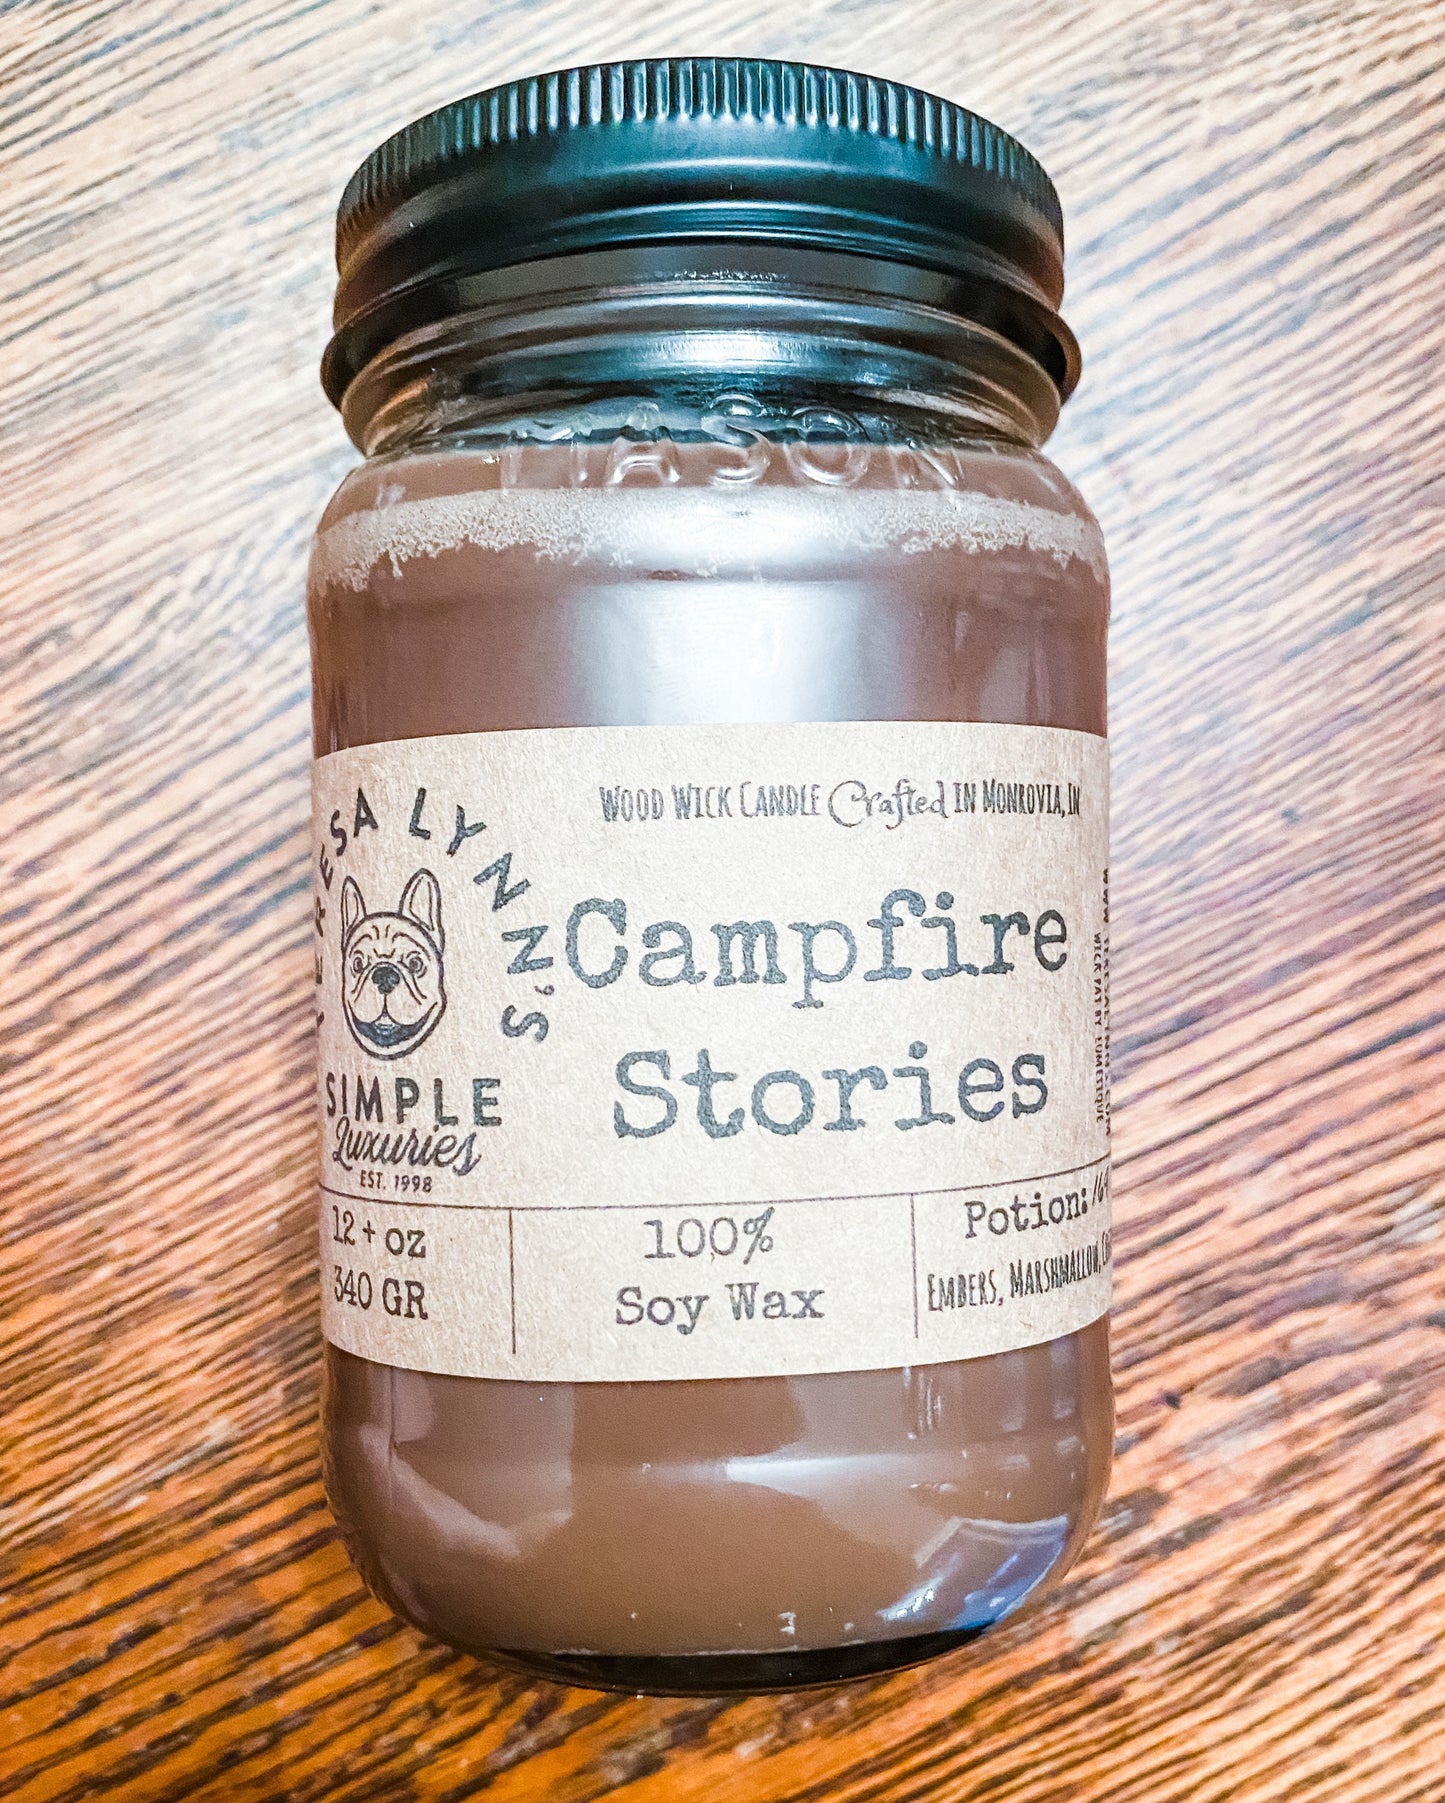 Campfire Stories, soy wax, wooden wick candle